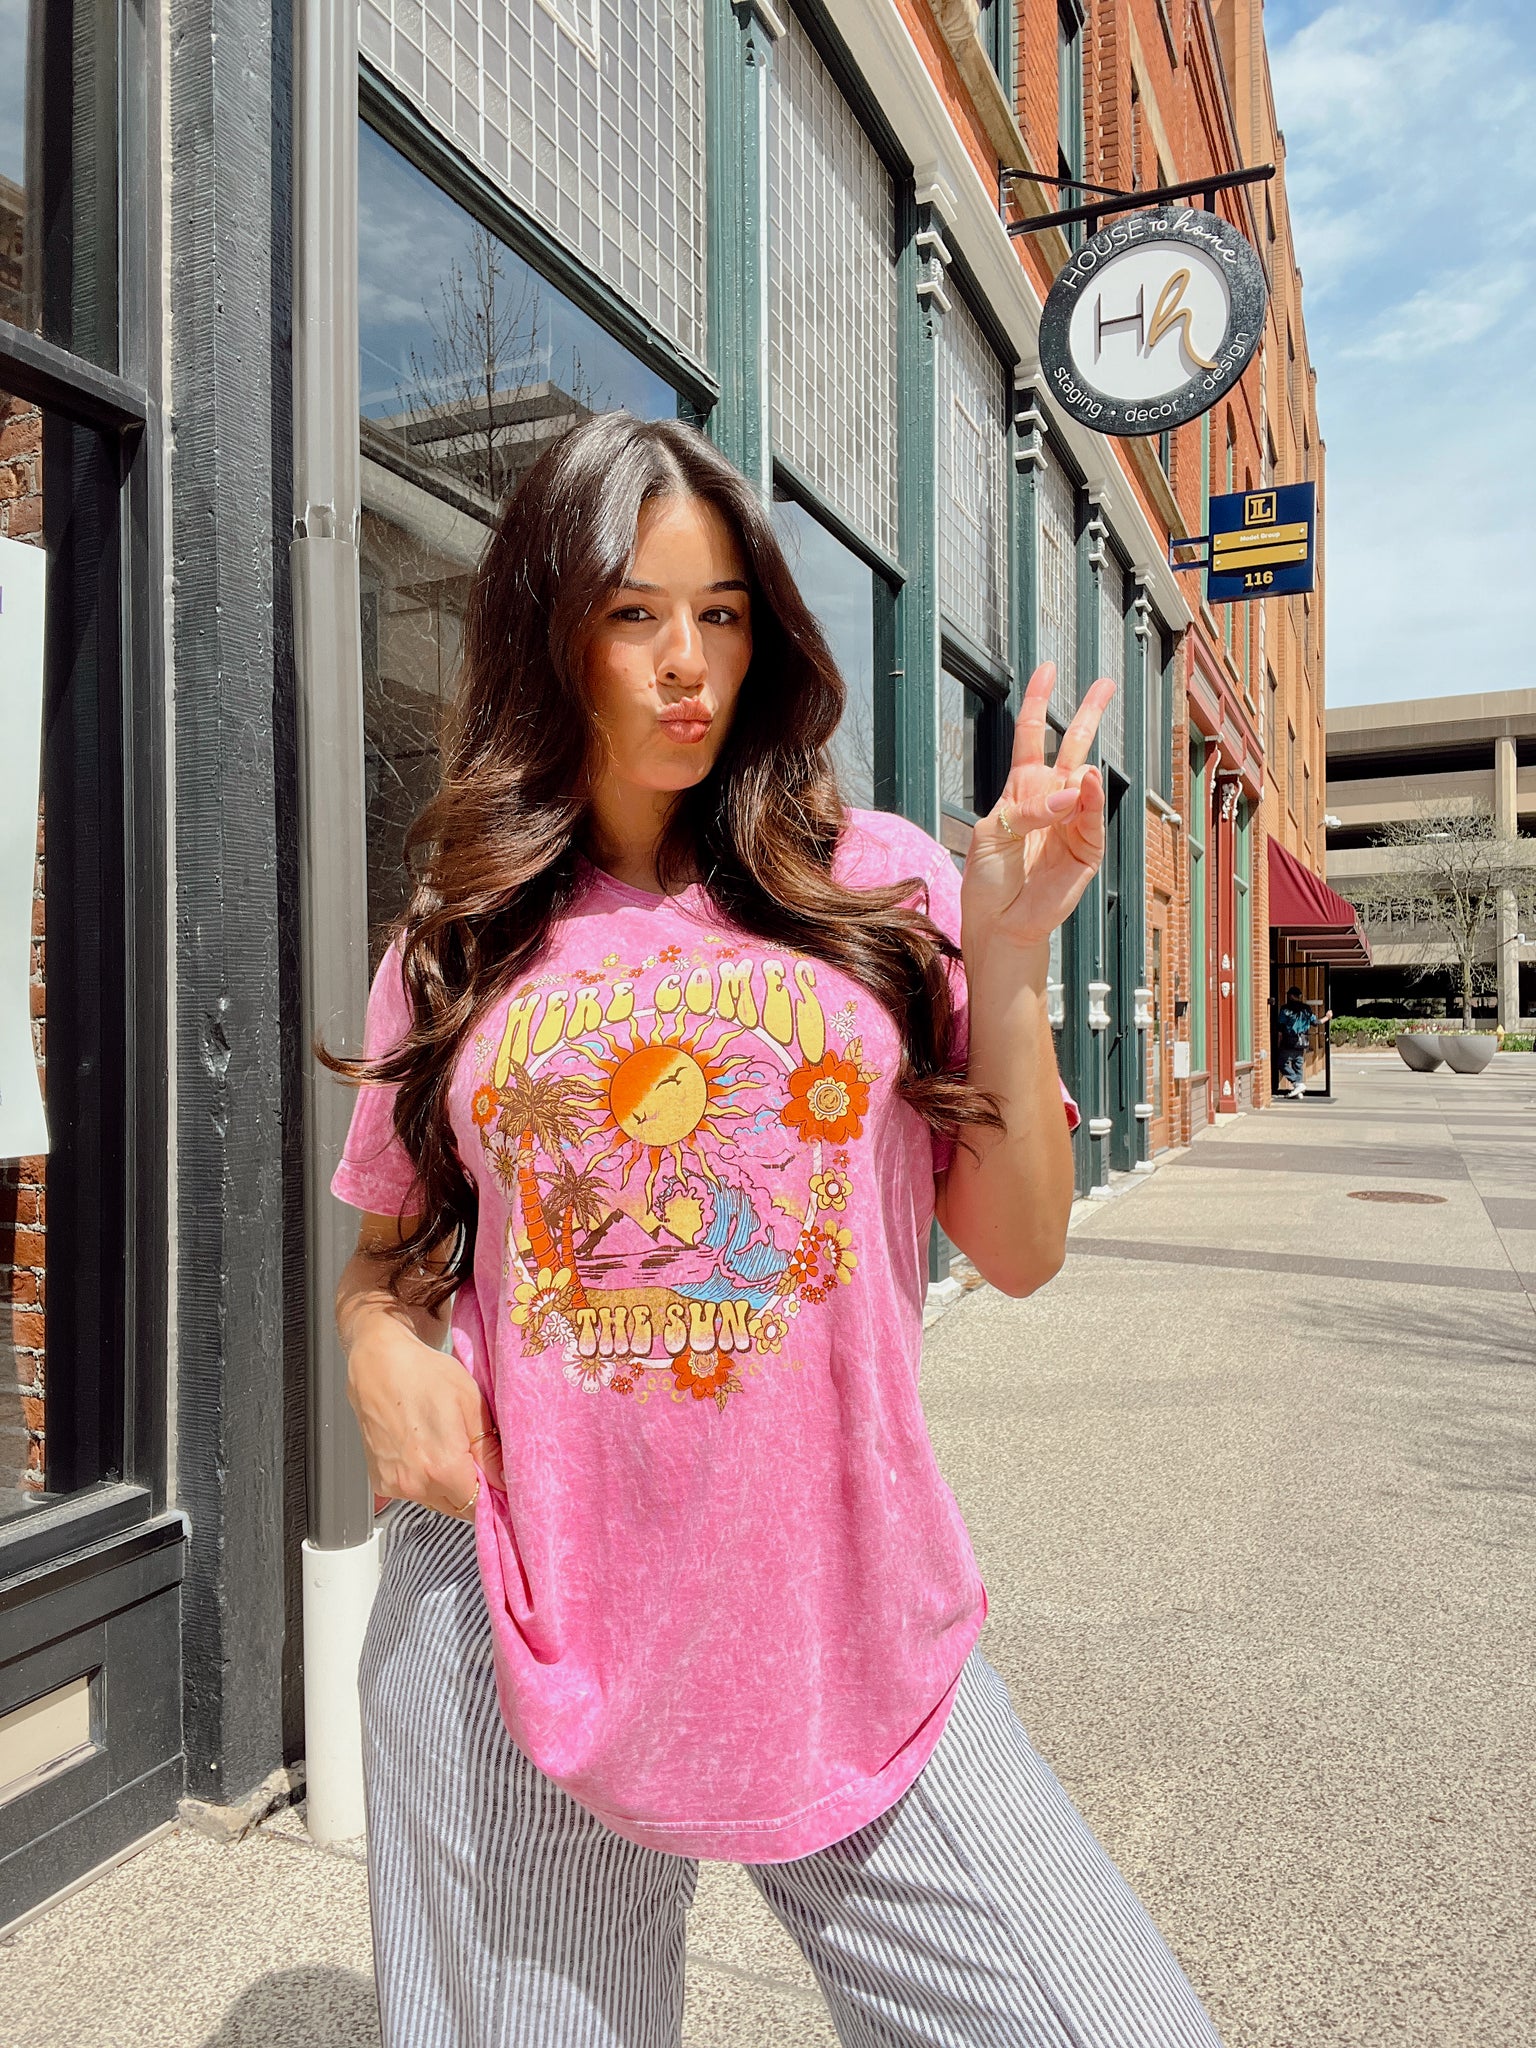 The Sun Washed Pink Graphic Tee